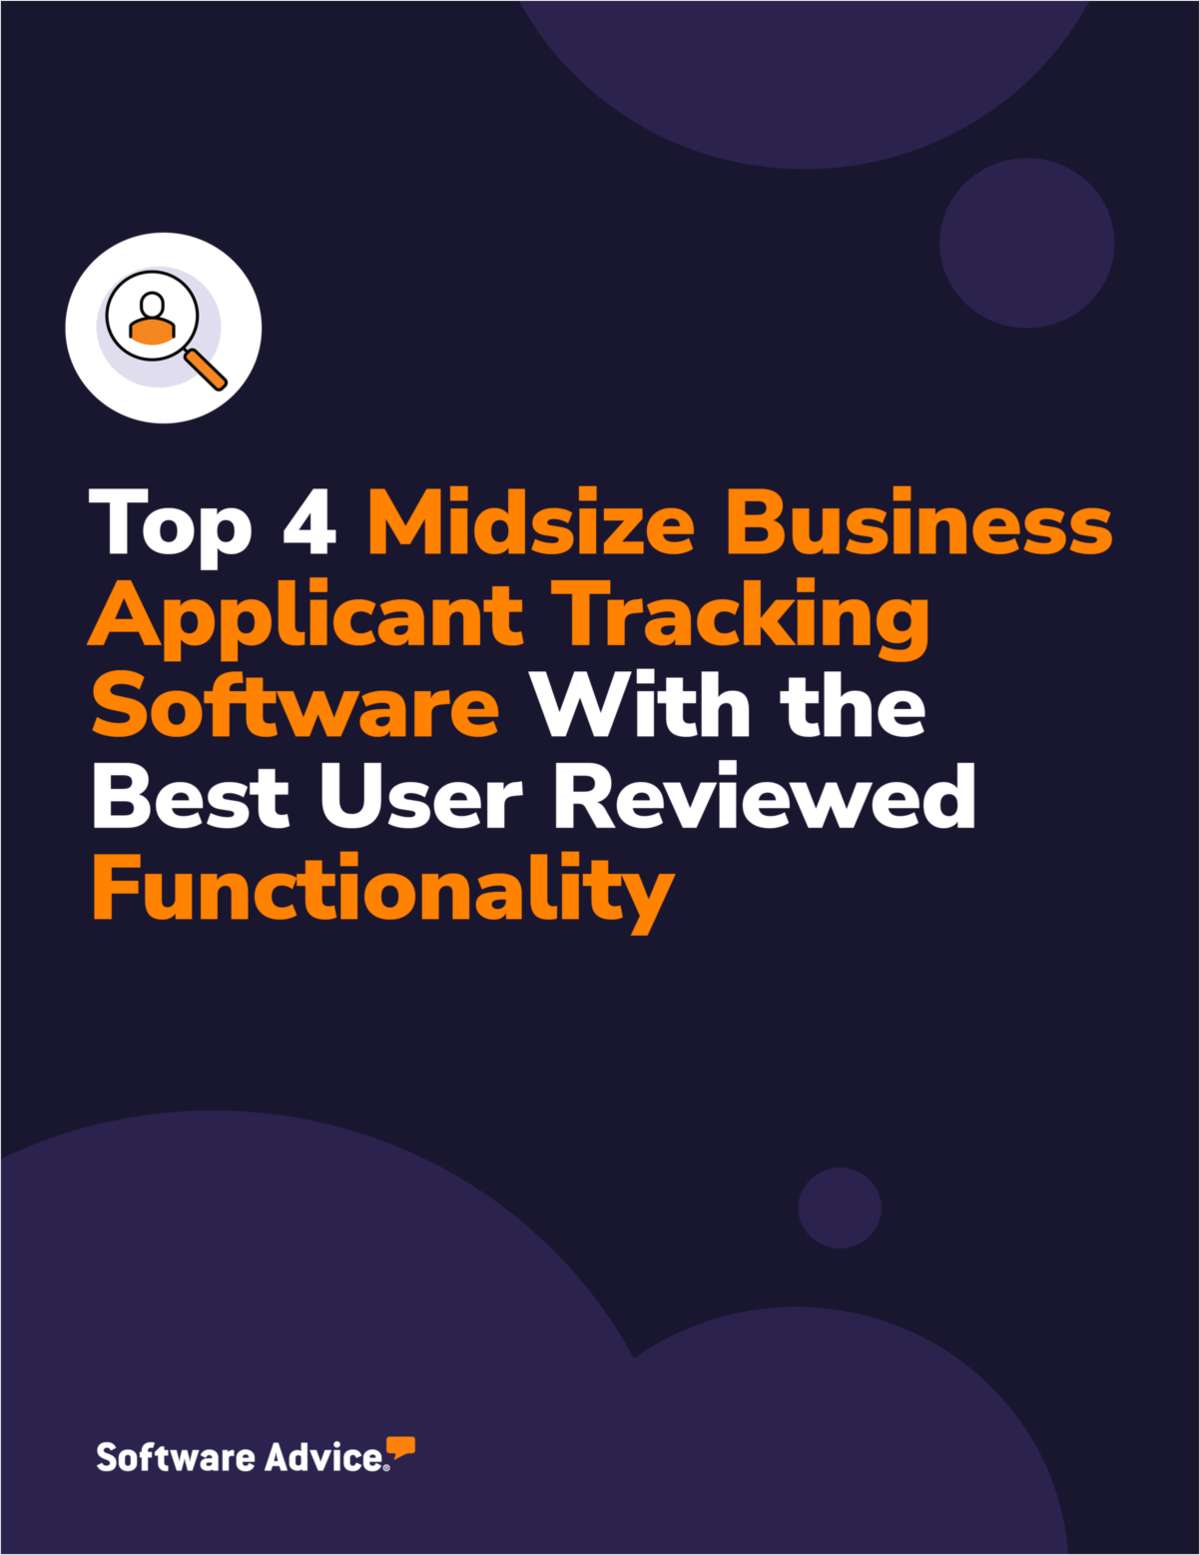 Top 4 Midsize Business Applicant Tracking Software With the Best User Reviewed Functionality